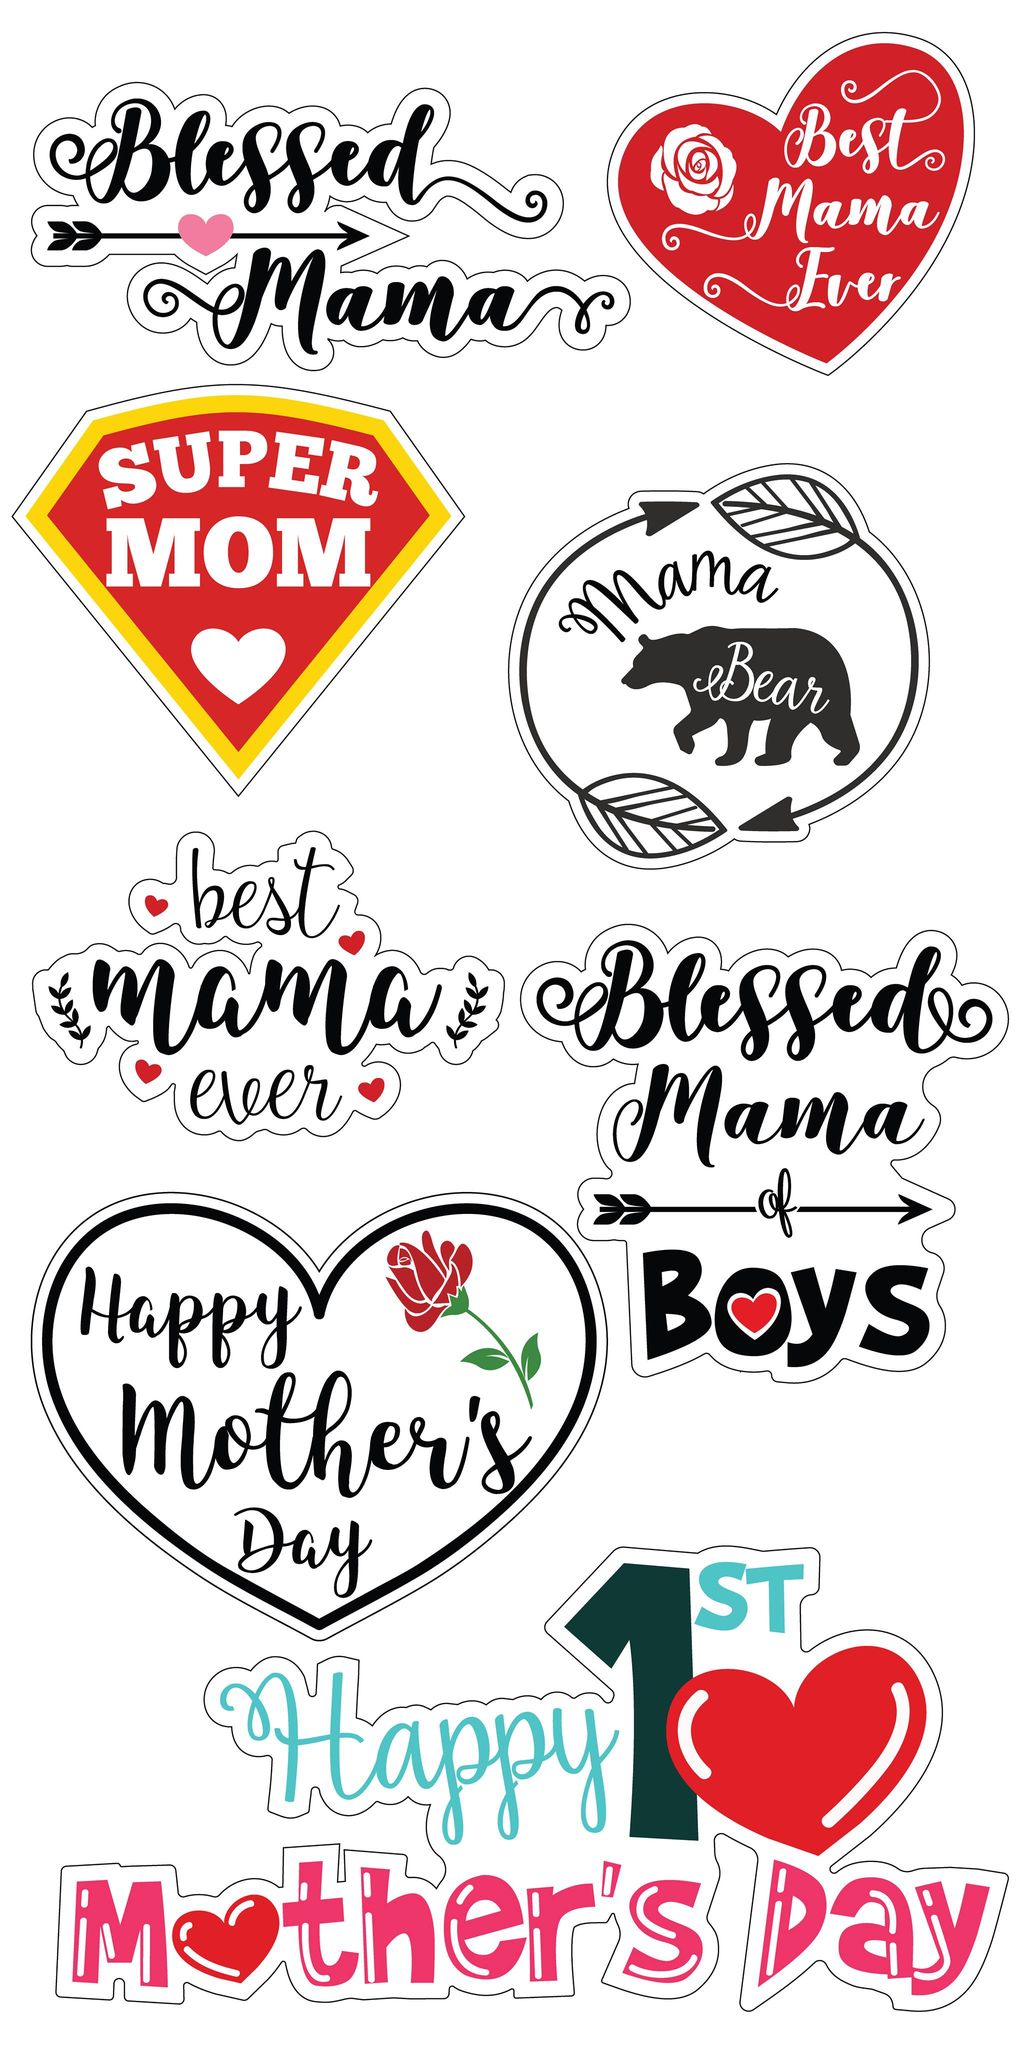 Happy Mother's Day Sayings - Sweet sayings about Mom!